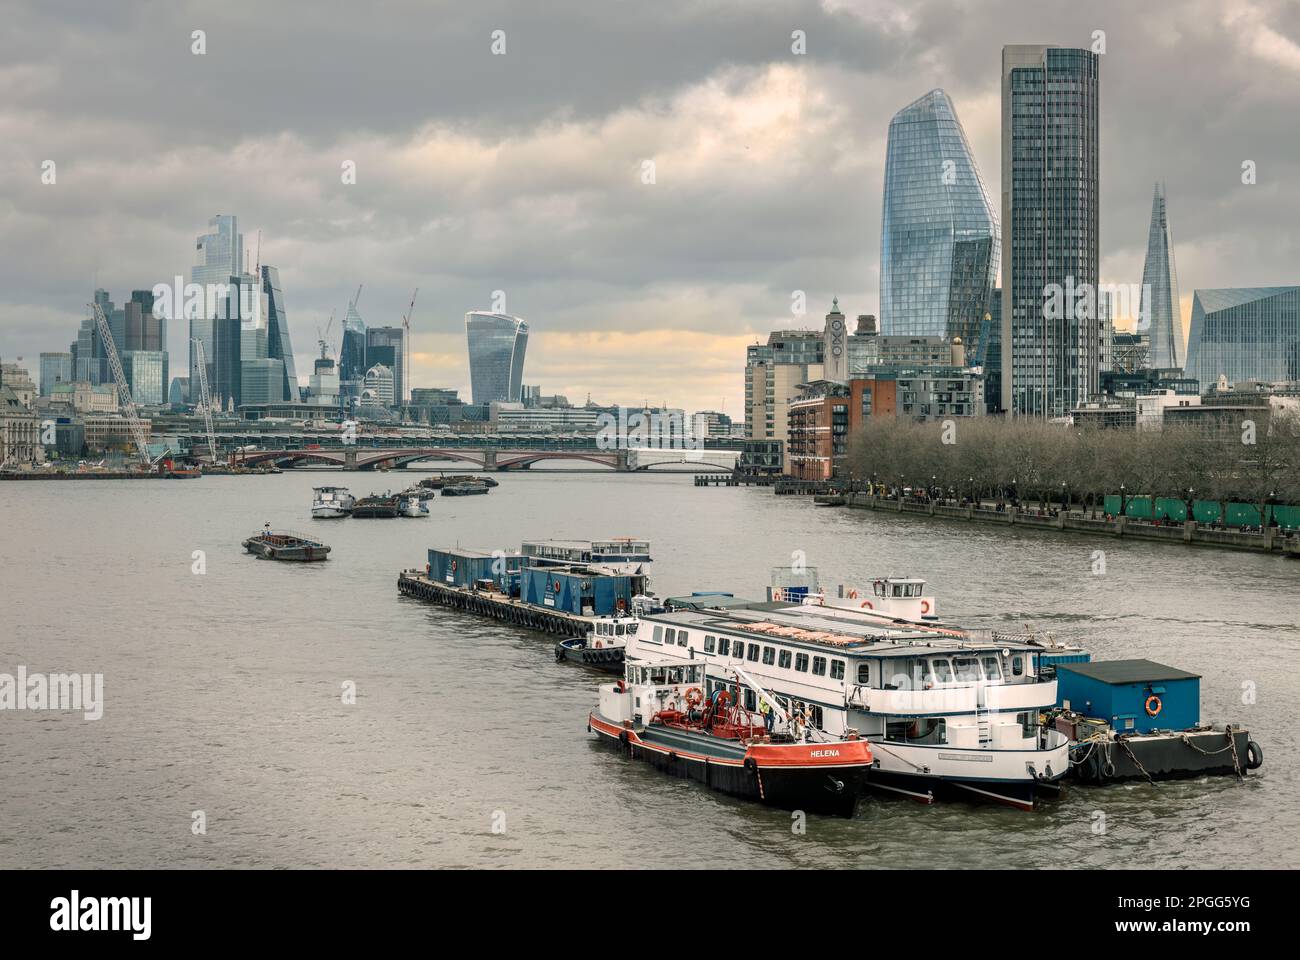 The River Thames from Waterloo Bridge, looking towards Blackfriars Bridge showing some of the iconic buildings on the London skyline. Stock Photo